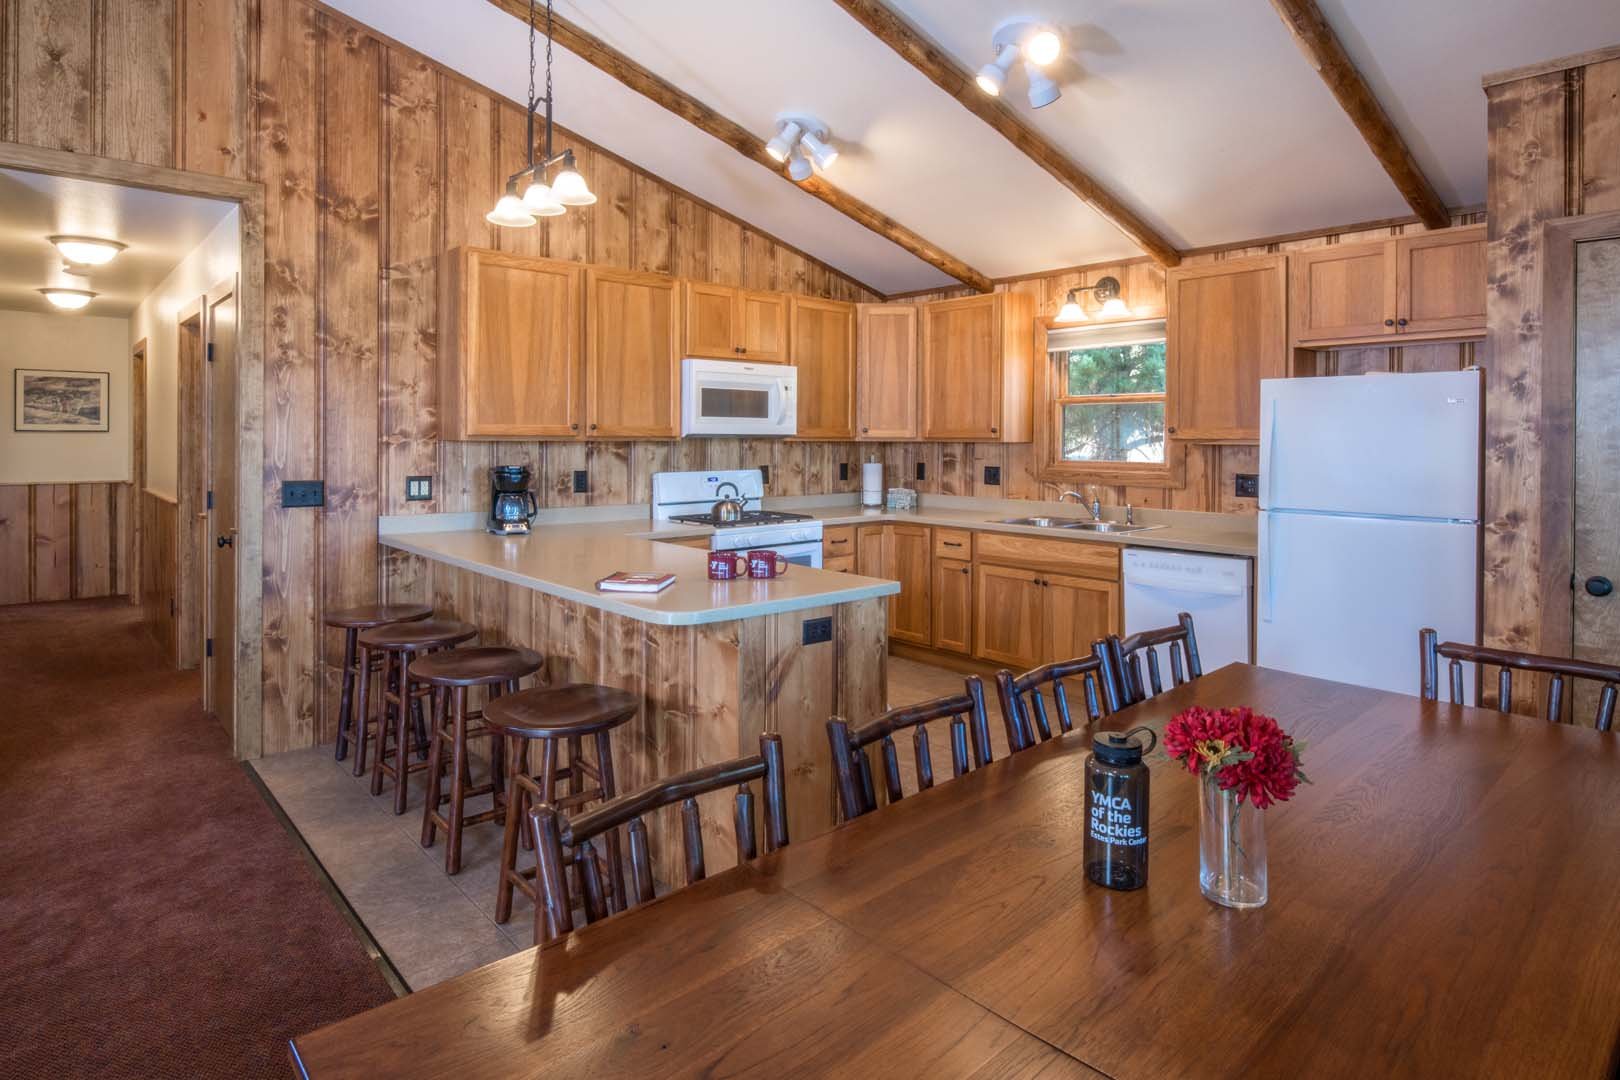 Kitchen inside cabin with kitchen island and dining table